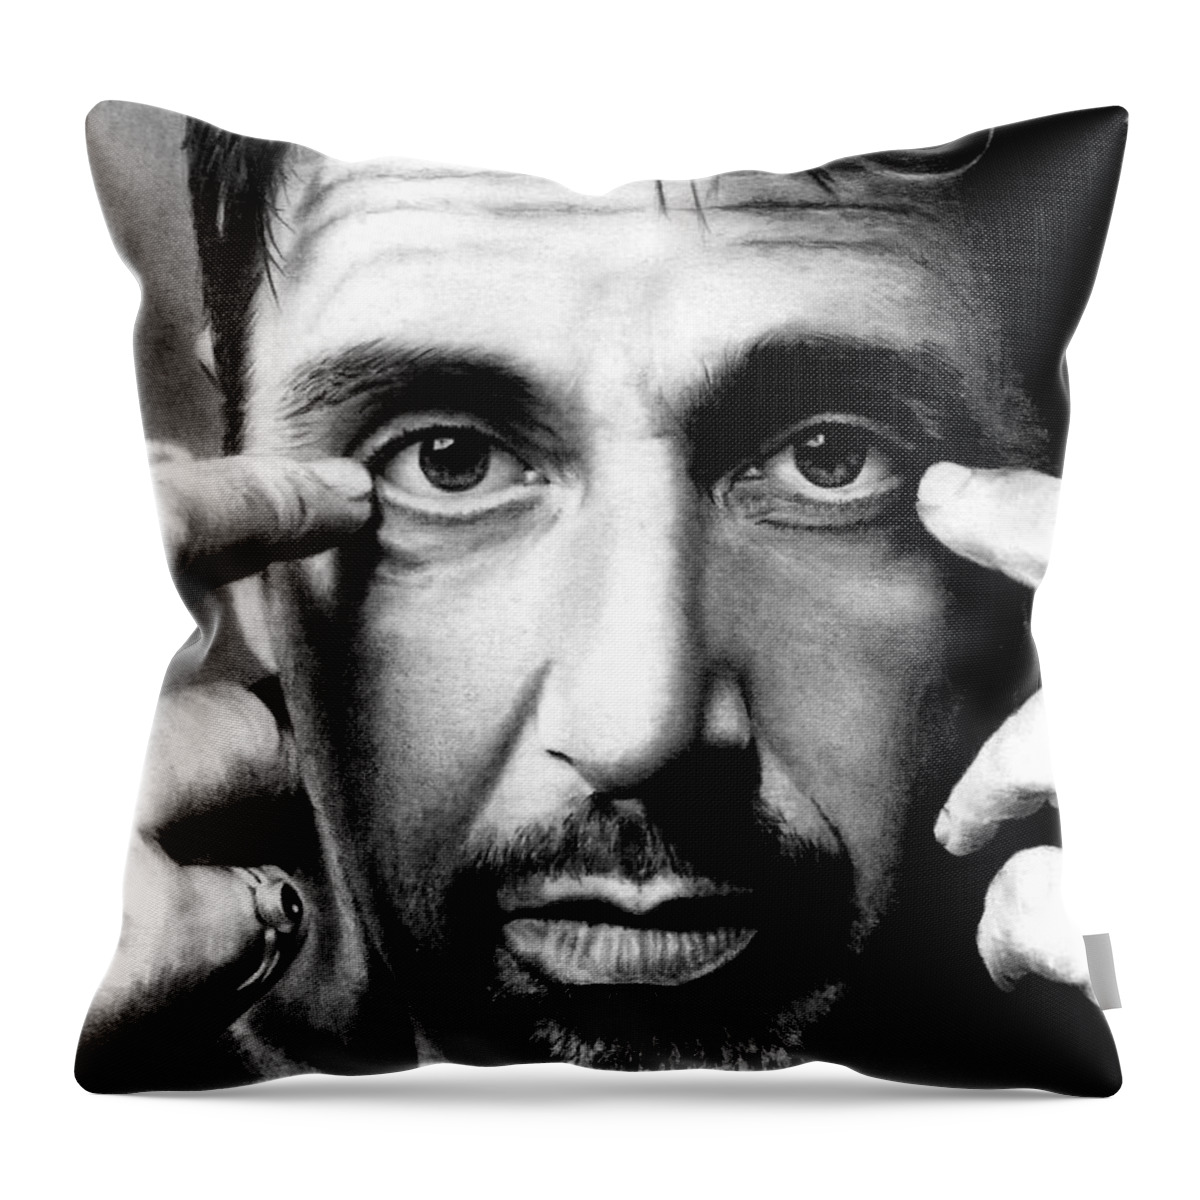 Al Pacino Throw Pillow featuring the drawing Al Pacino by Rick Fortson